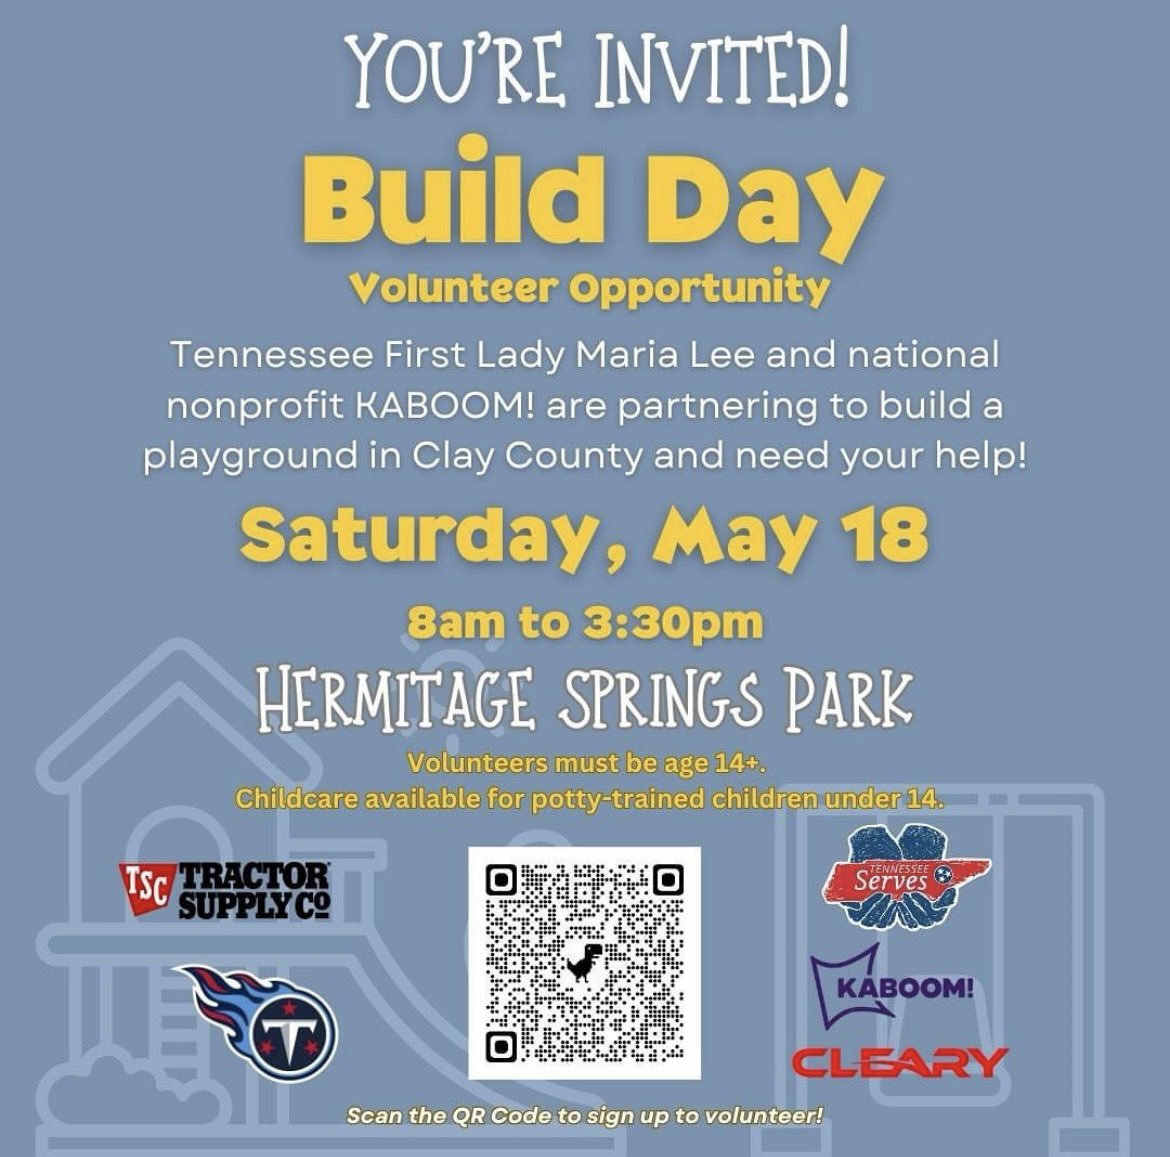 .@MariaLeeTN & I invite you to join us for a #TennesseeServes Build Day in Clay County on Saturday, May 18. Learn more & sign up to volunteer at: bit.ly/TNServesVolunt…